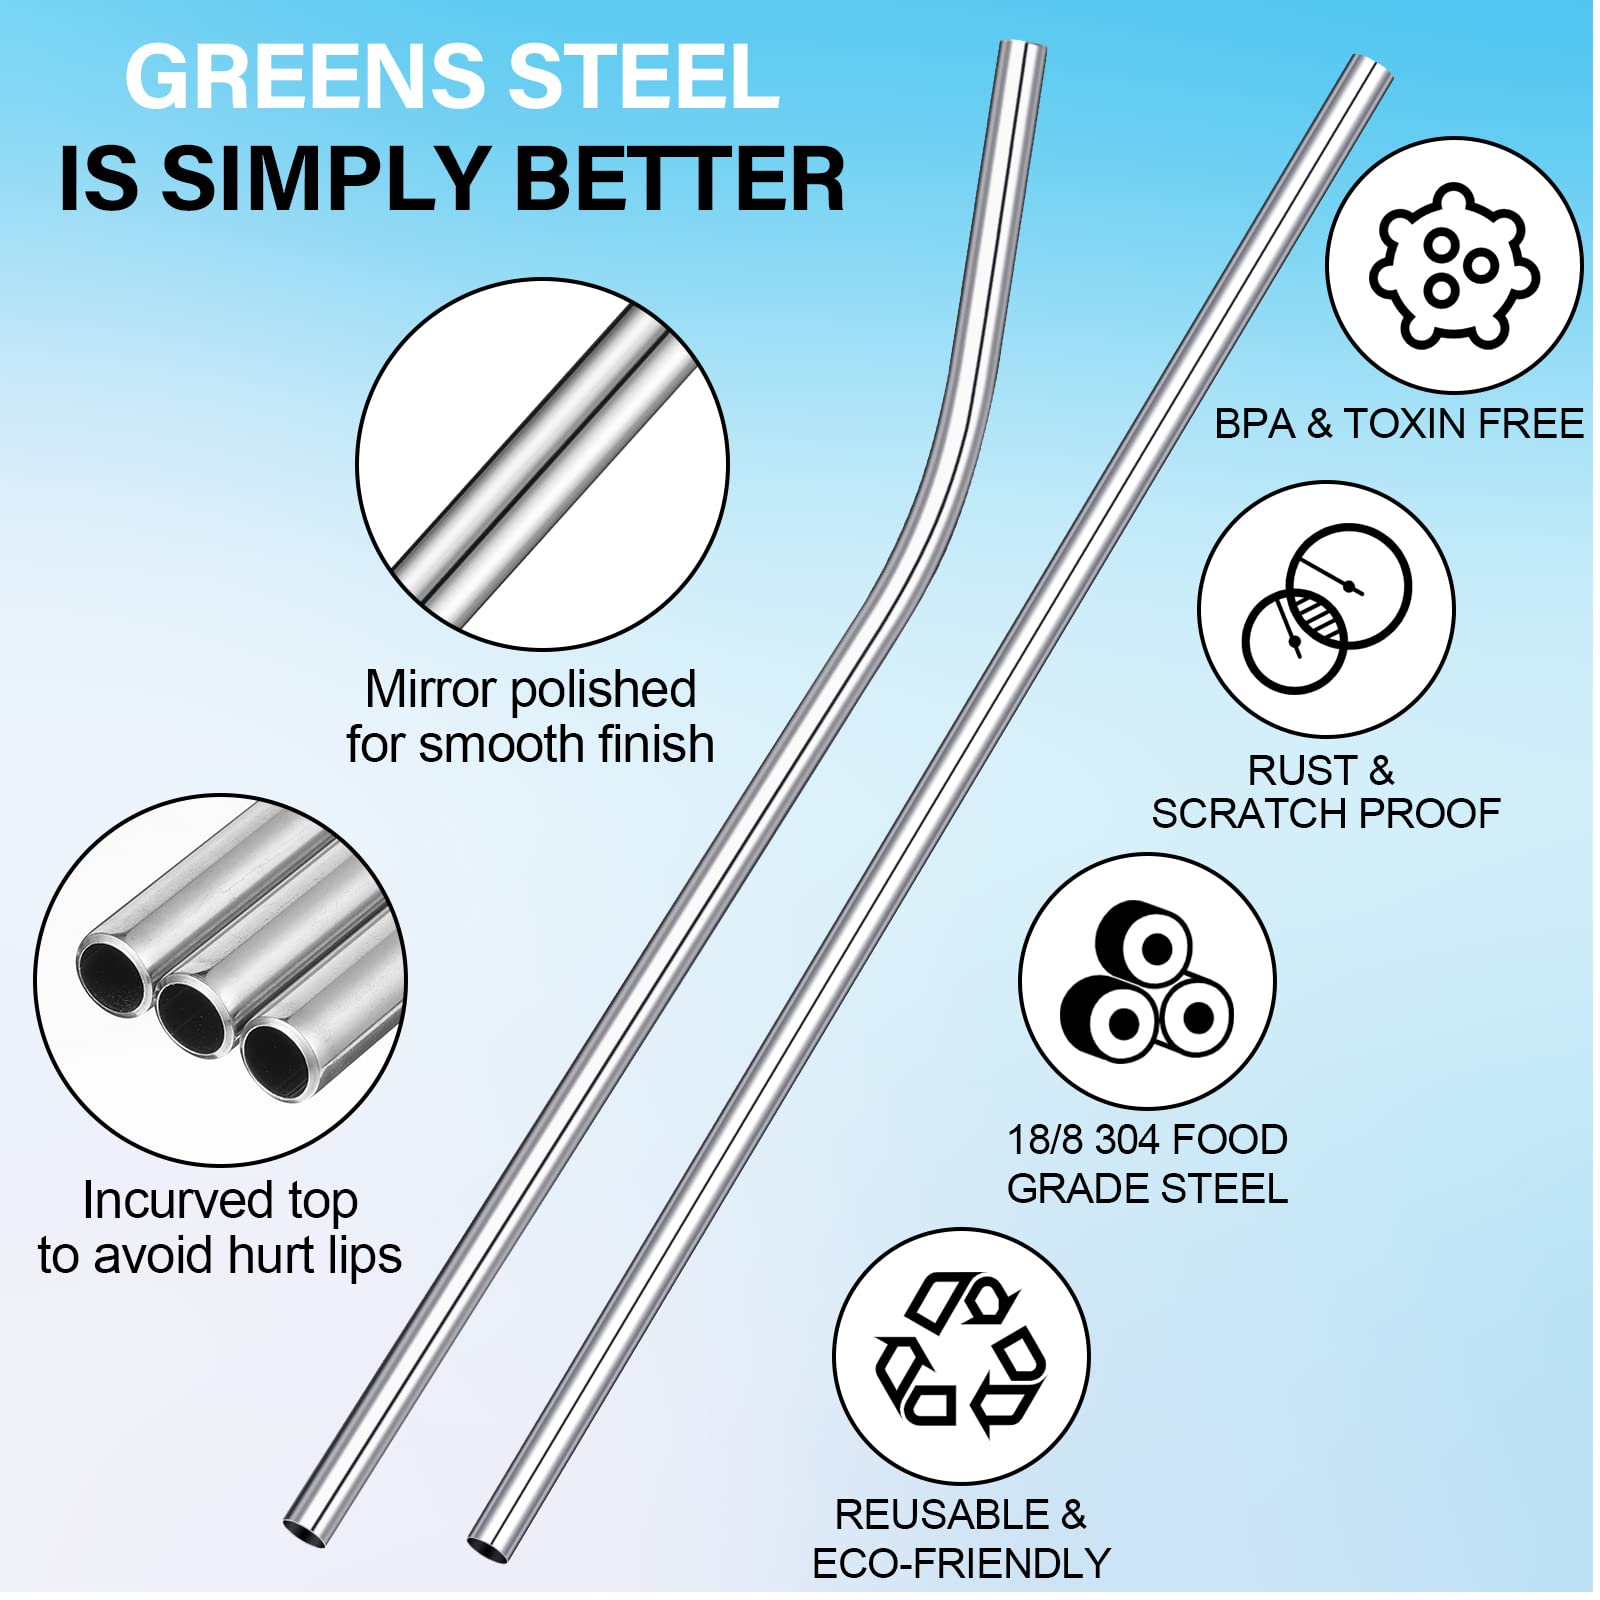 20 Pieces 14 Inch Stainless Steel Straws Long Drinking Straws for 100 oz Tumblers with Silicone Tips, Reusable Metal Drinking Straws Extra with 4 Pieces Cleaning Brush